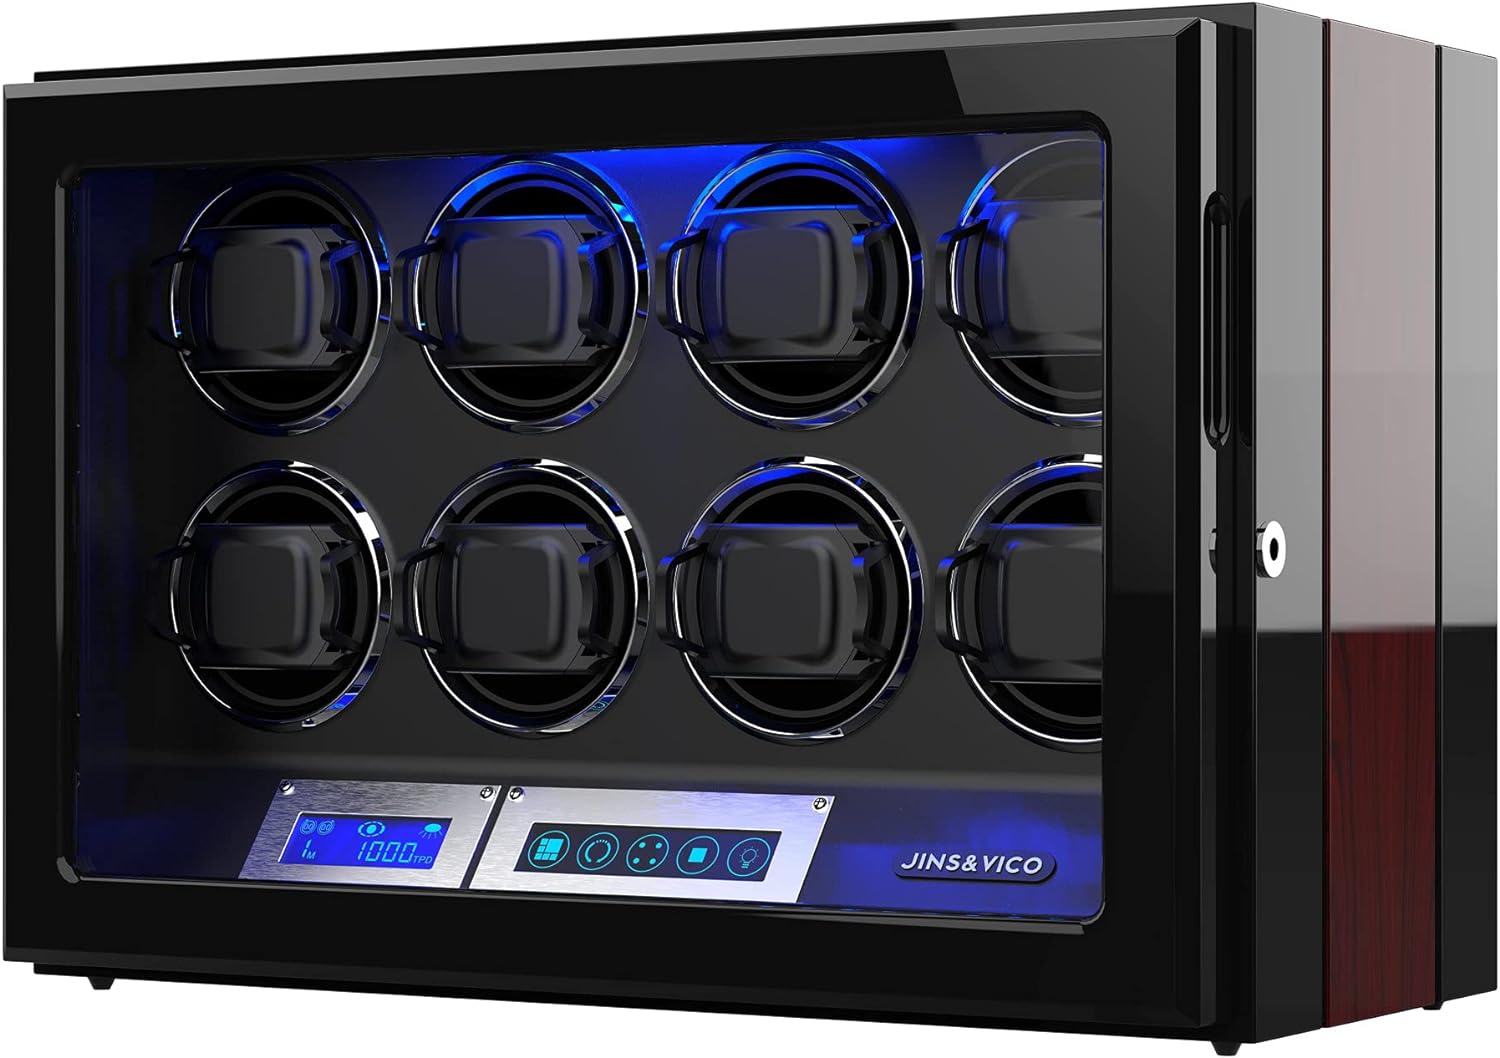 Buy Watch Winder, Adjustable [Upgraded] Watch Pillows, 8 Winding Spaces Watch  Winders for Automatic Watches, Built-in Illumination Online in Pakistan.  B07H8XXYBZ